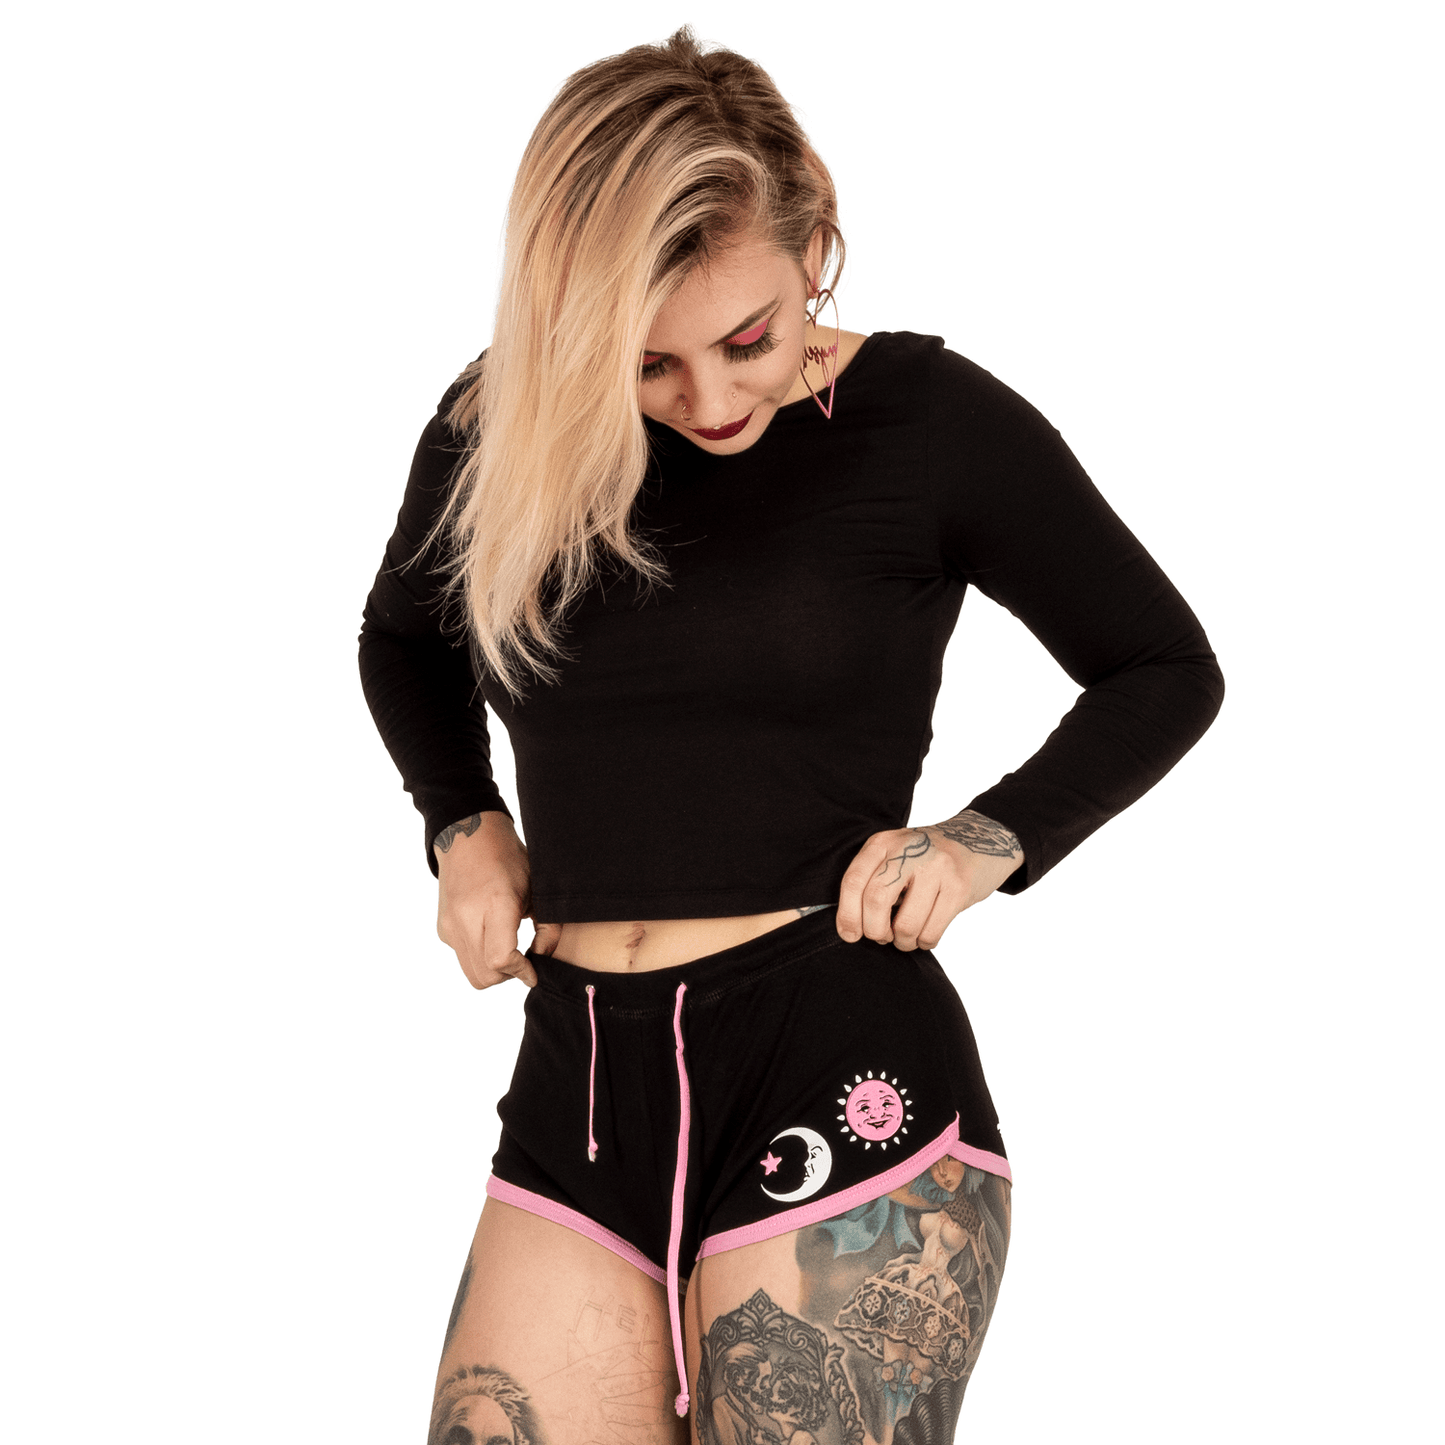 Too Fast | Short Shorts Black Pink | Witch Bitch